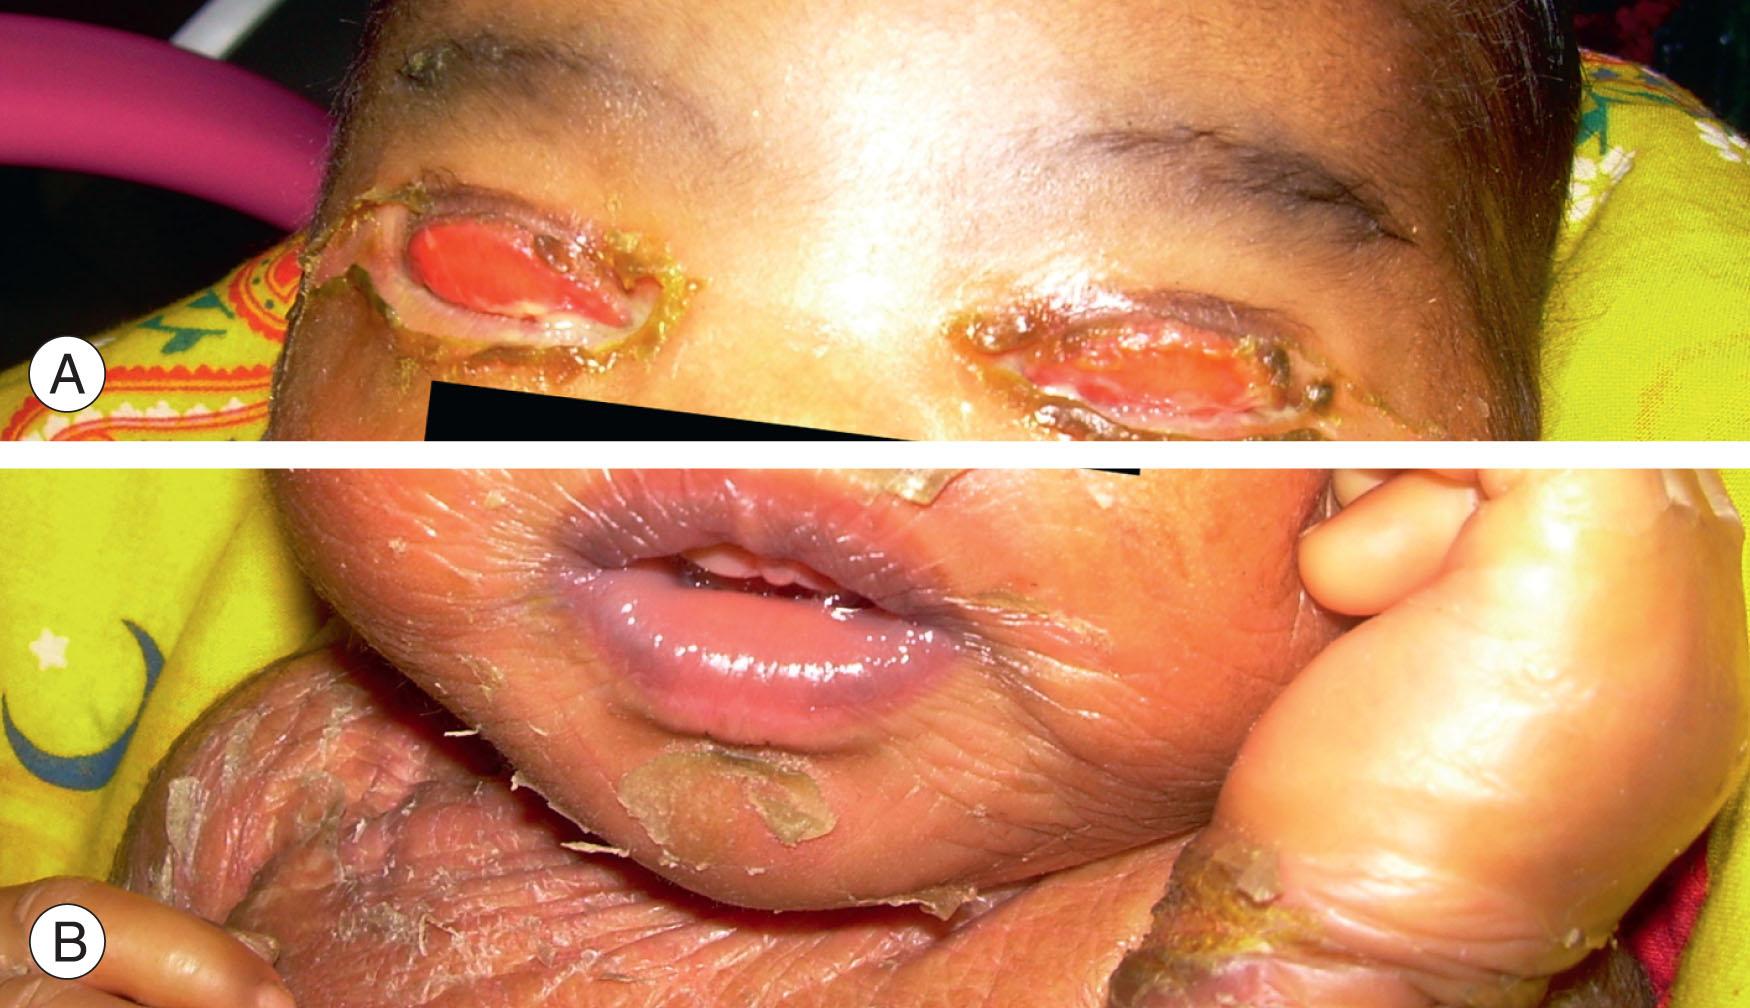 Fig. 29.4, Ichthyosis. (A) There is keratinization of the upper palpebral conjunctiva secondary to ectropion of the upper lids. (B) The classical “stretched out” skin lesions are seen predominantly around the mouth and neck.